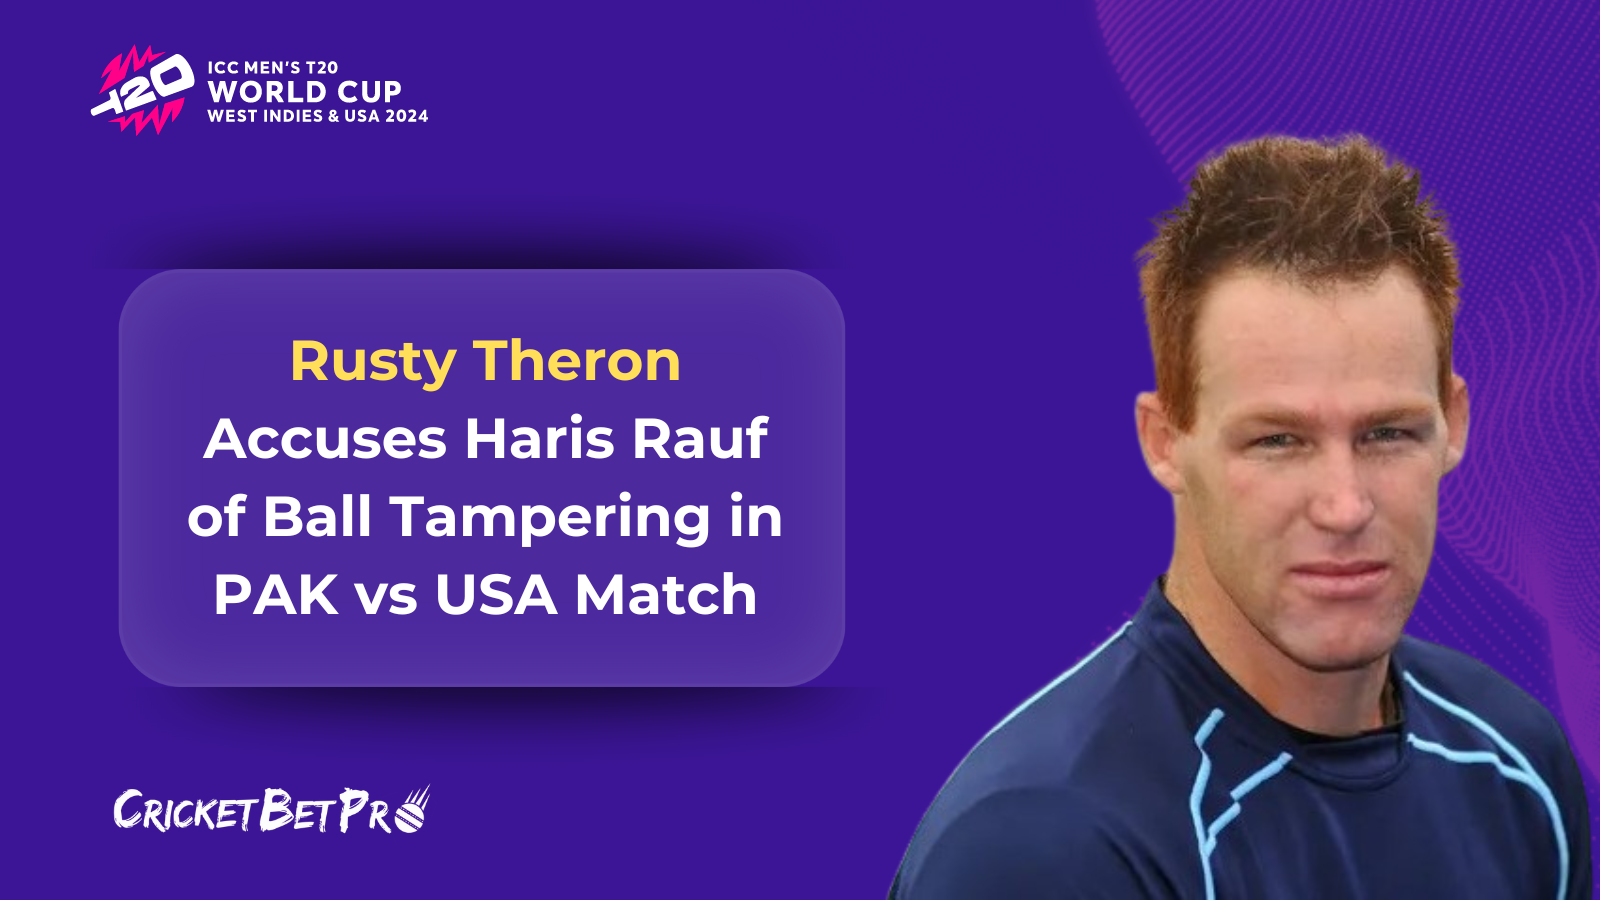 Rusty Theron Accuses Haris Rauf of Ball Tampering in PAK vs USA Match